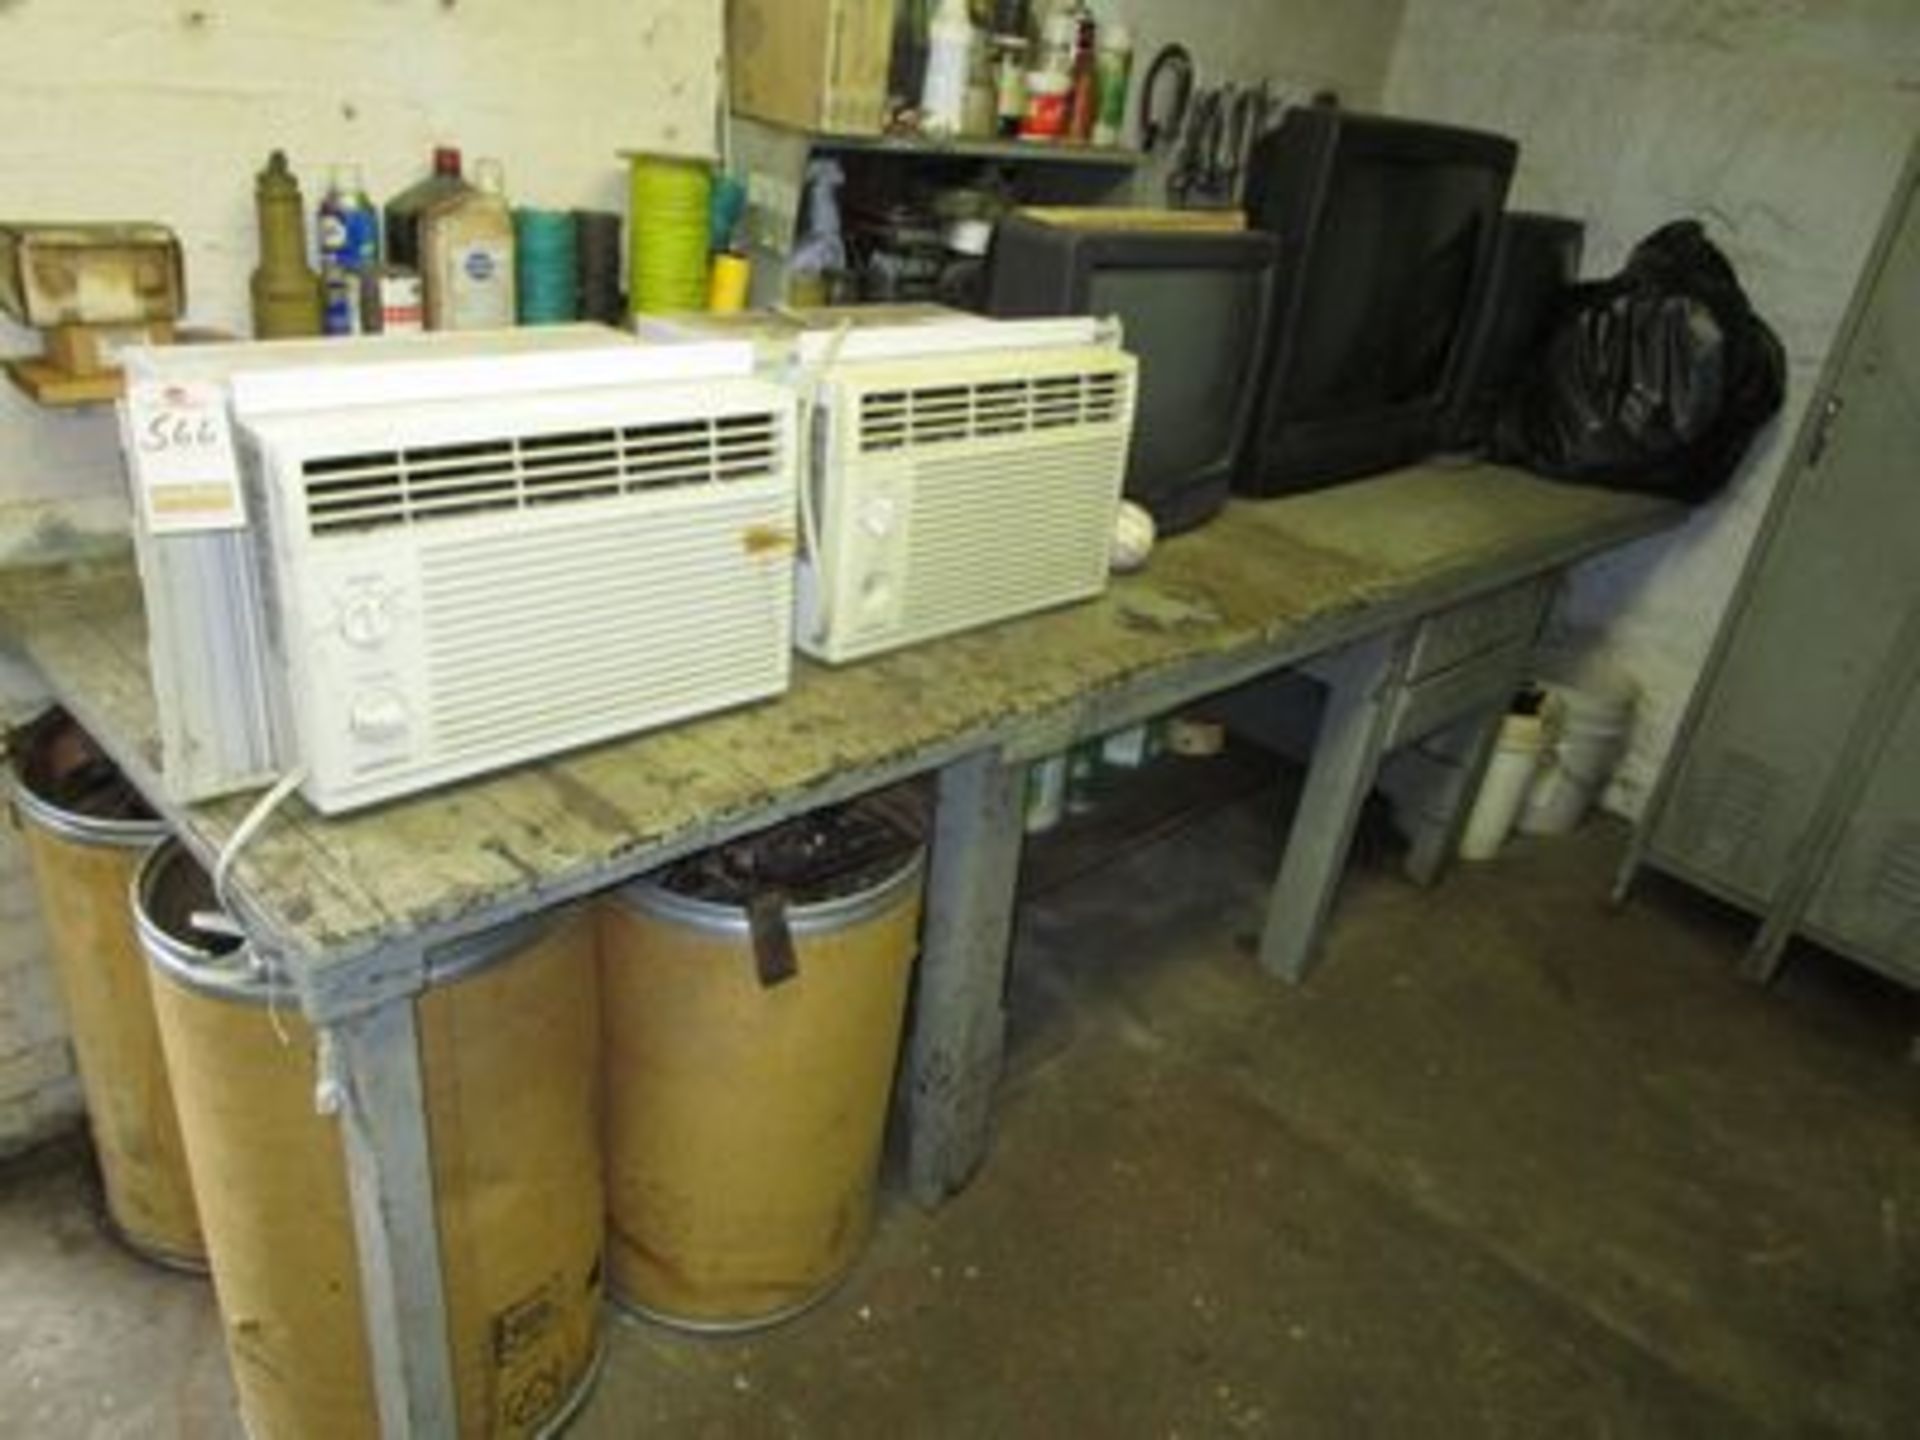 LOT OF ASS'T AIR CONDITIONERS, TV'S, & MET. W/ 9' WOOD WORKTABLE